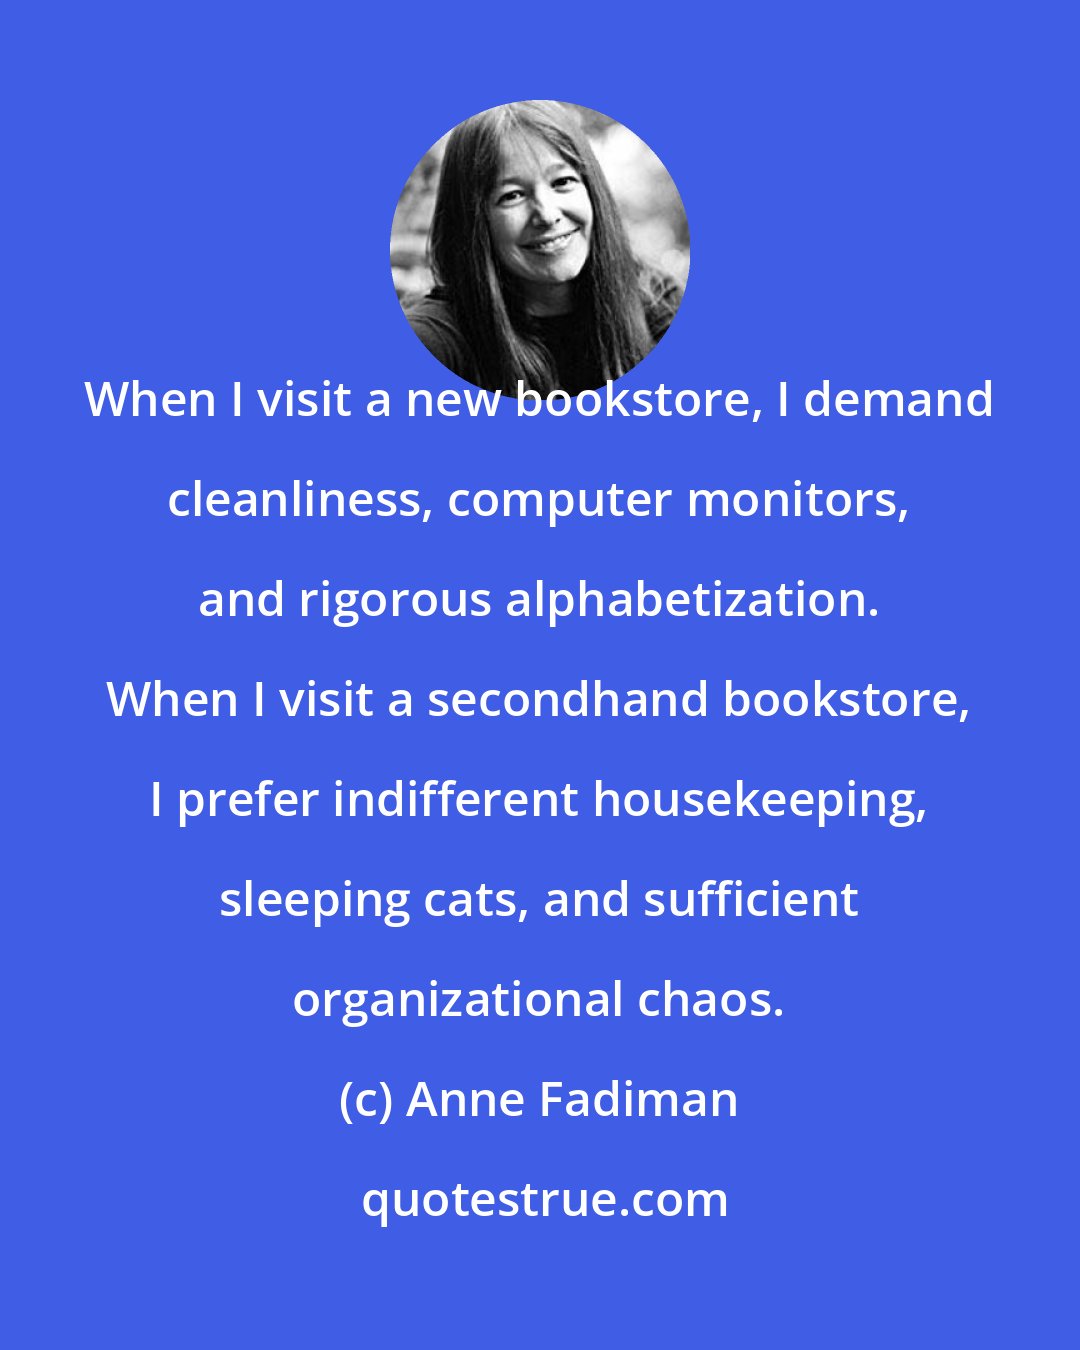 Anne Fadiman: When I visit a new bookstore, I demand cleanliness, computer monitors, and rigorous alphabetization. When I visit a secondhand bookstore, I prefer indifferent housekeeping, sleeping cats, and sufficient organizational chaos.